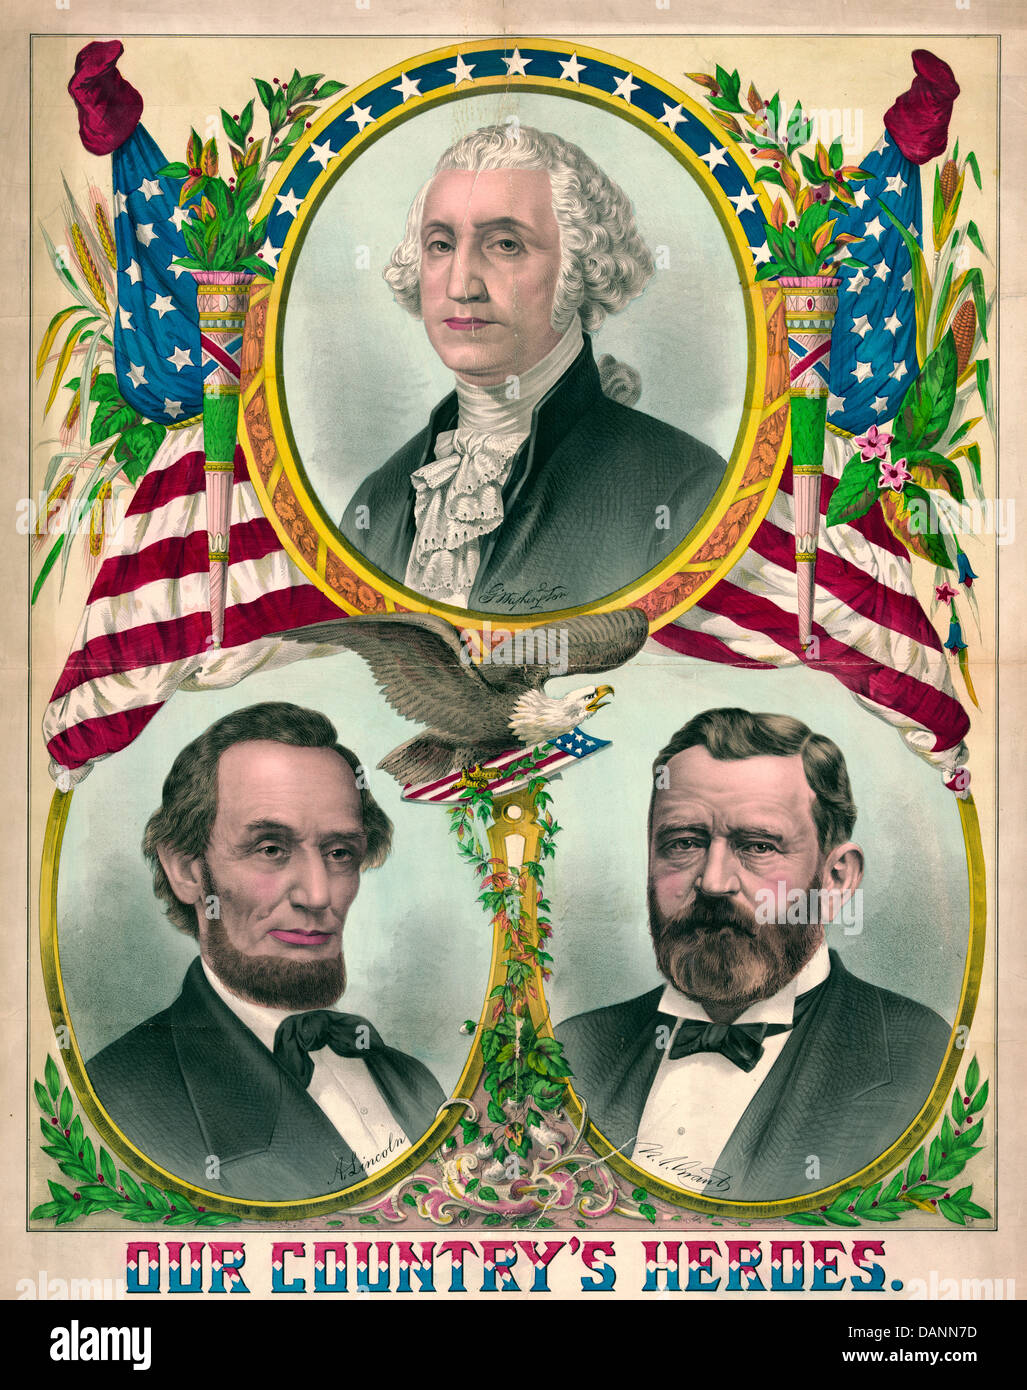 Our Country's Heroes - George Washington, Abraham Lincoln and Ulysses Grant on a poster, circa 1880 Stock Photo